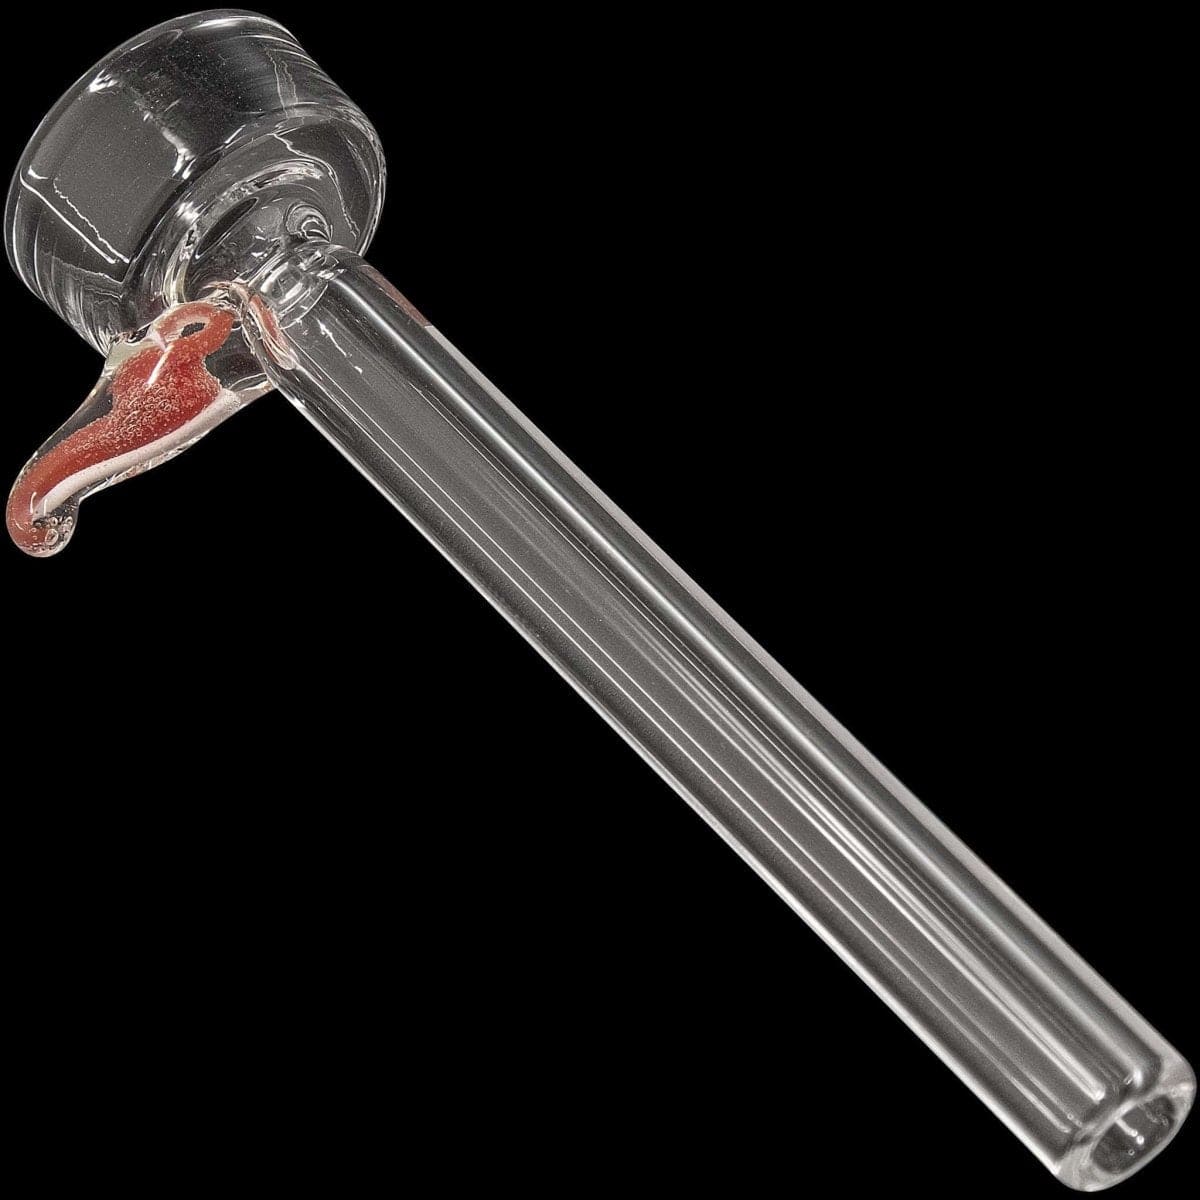 LA Pipes Smoking Accessory Red 9mm Clear Slide Bowl w/ Color Handle for Pull-Stem Bongs